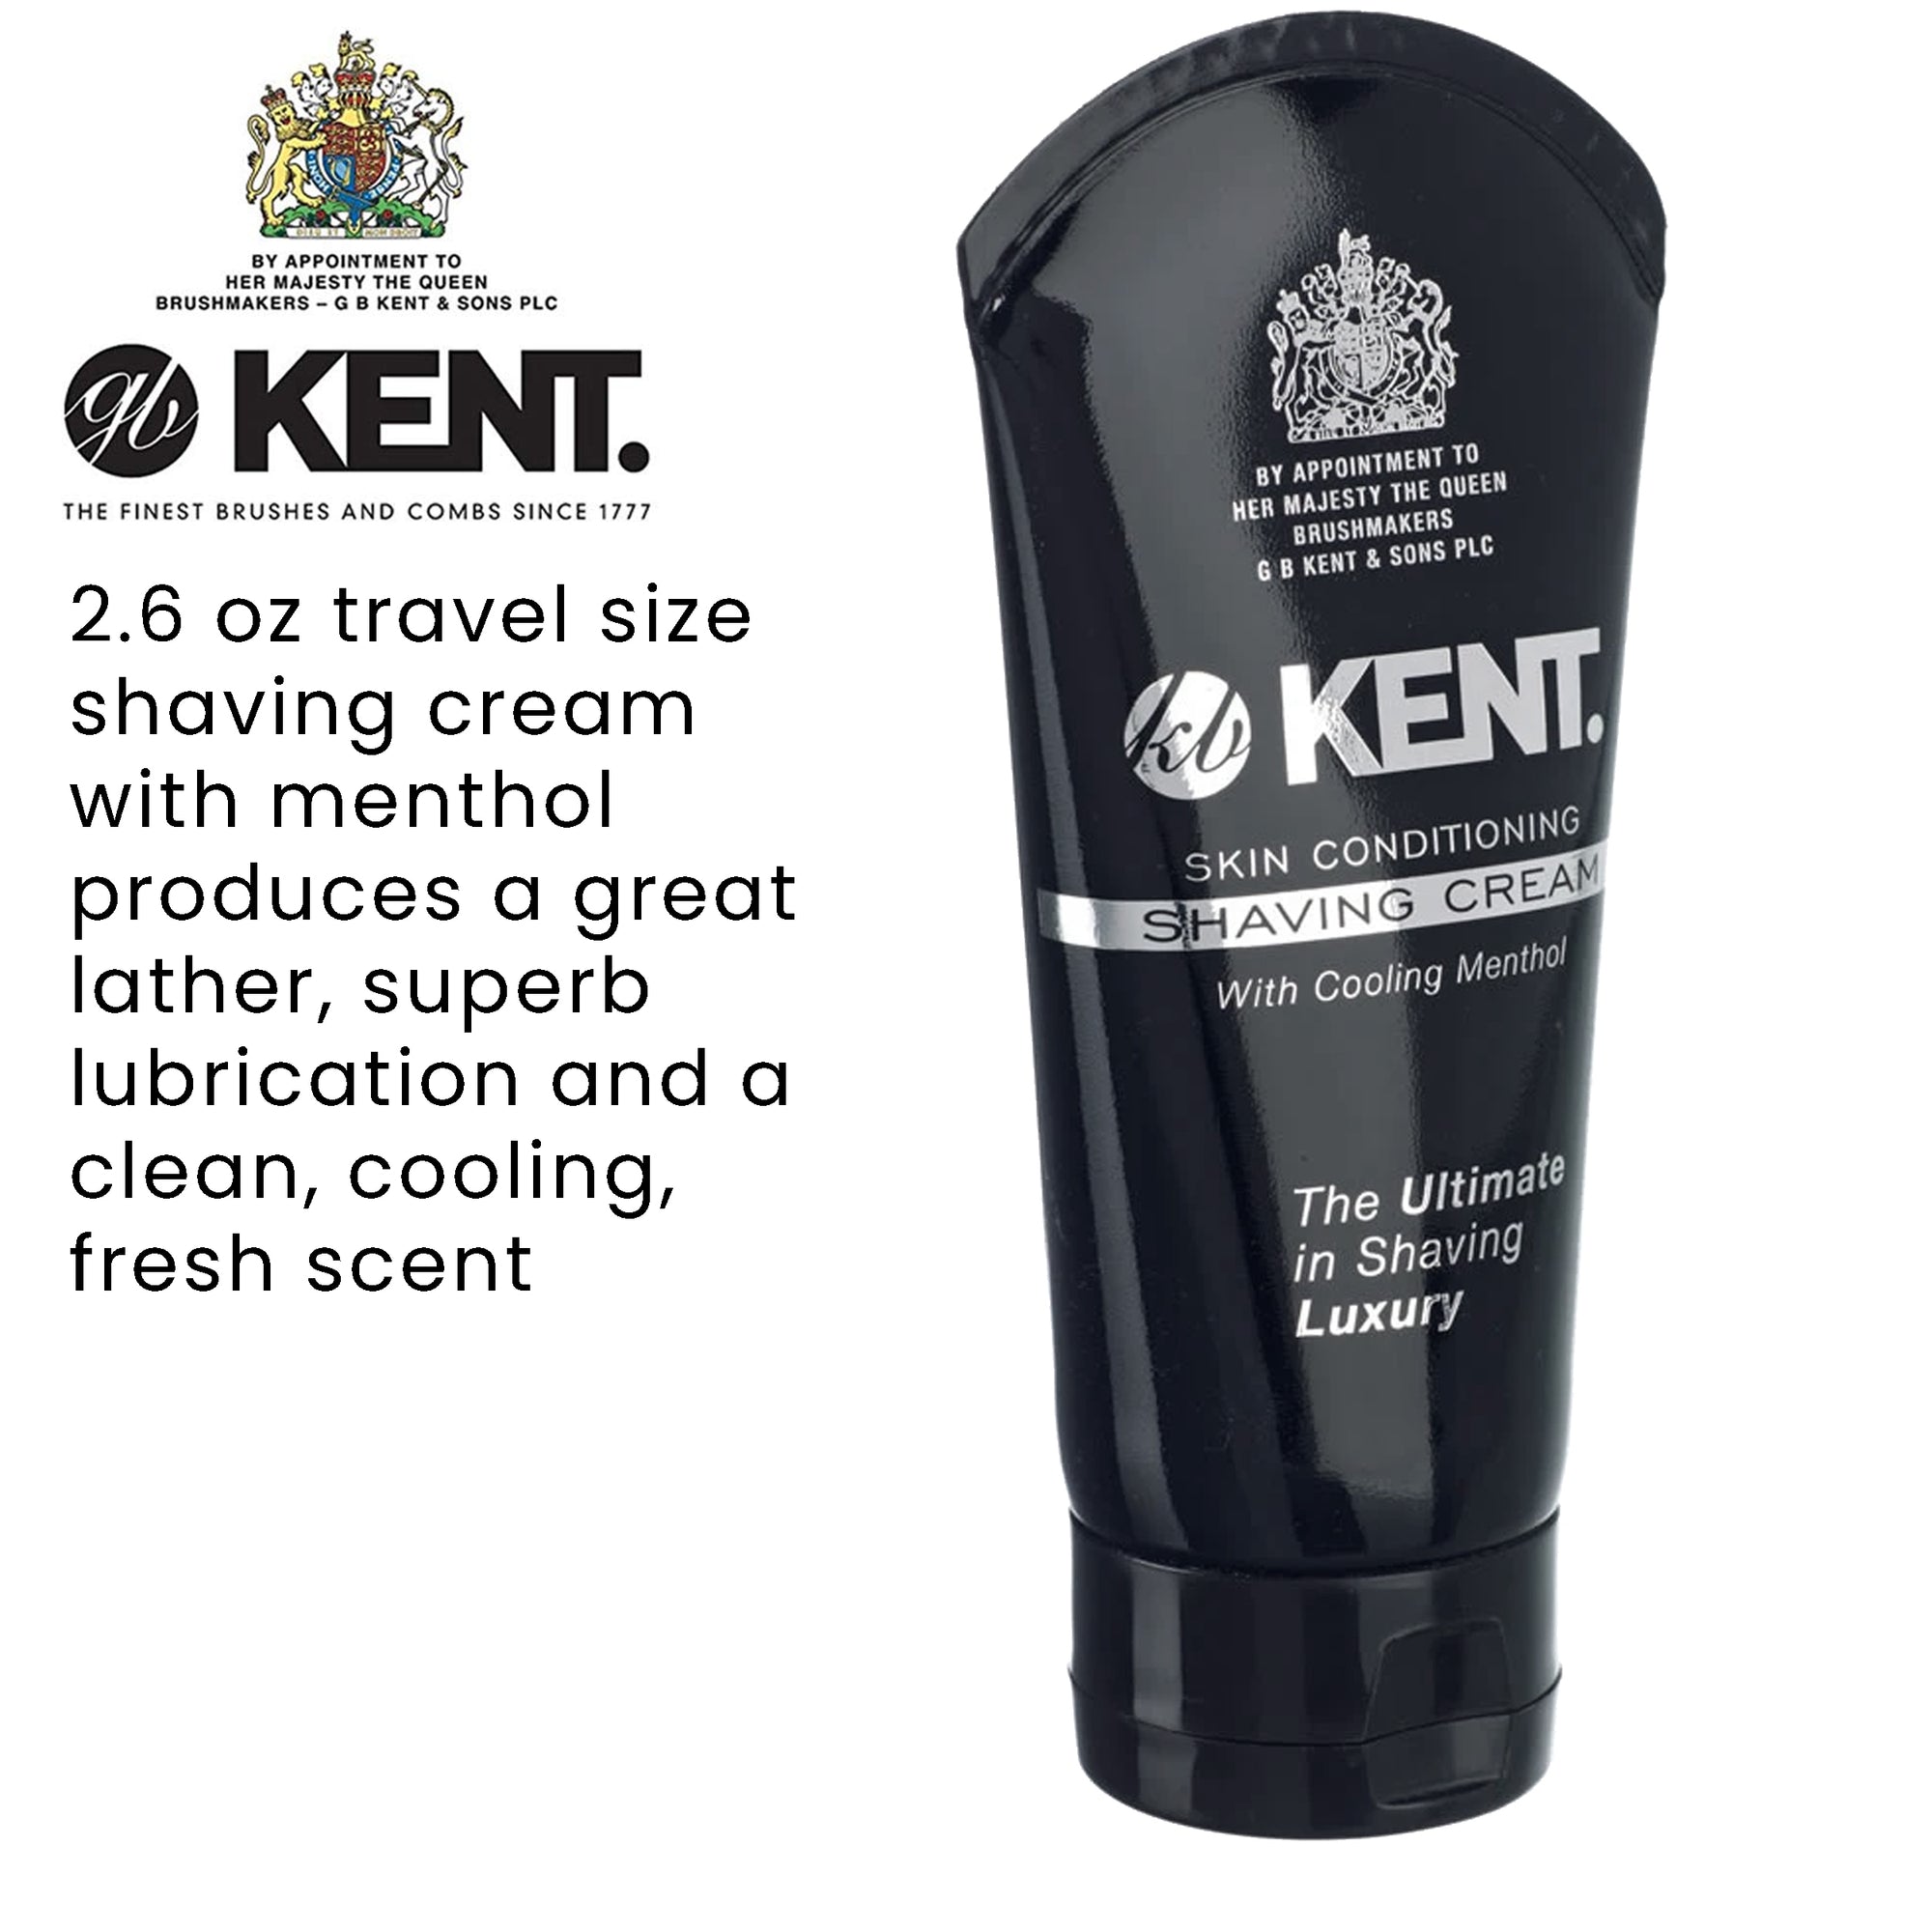 75ml Luxury Travel Shaving Cream with Cooling Menthol